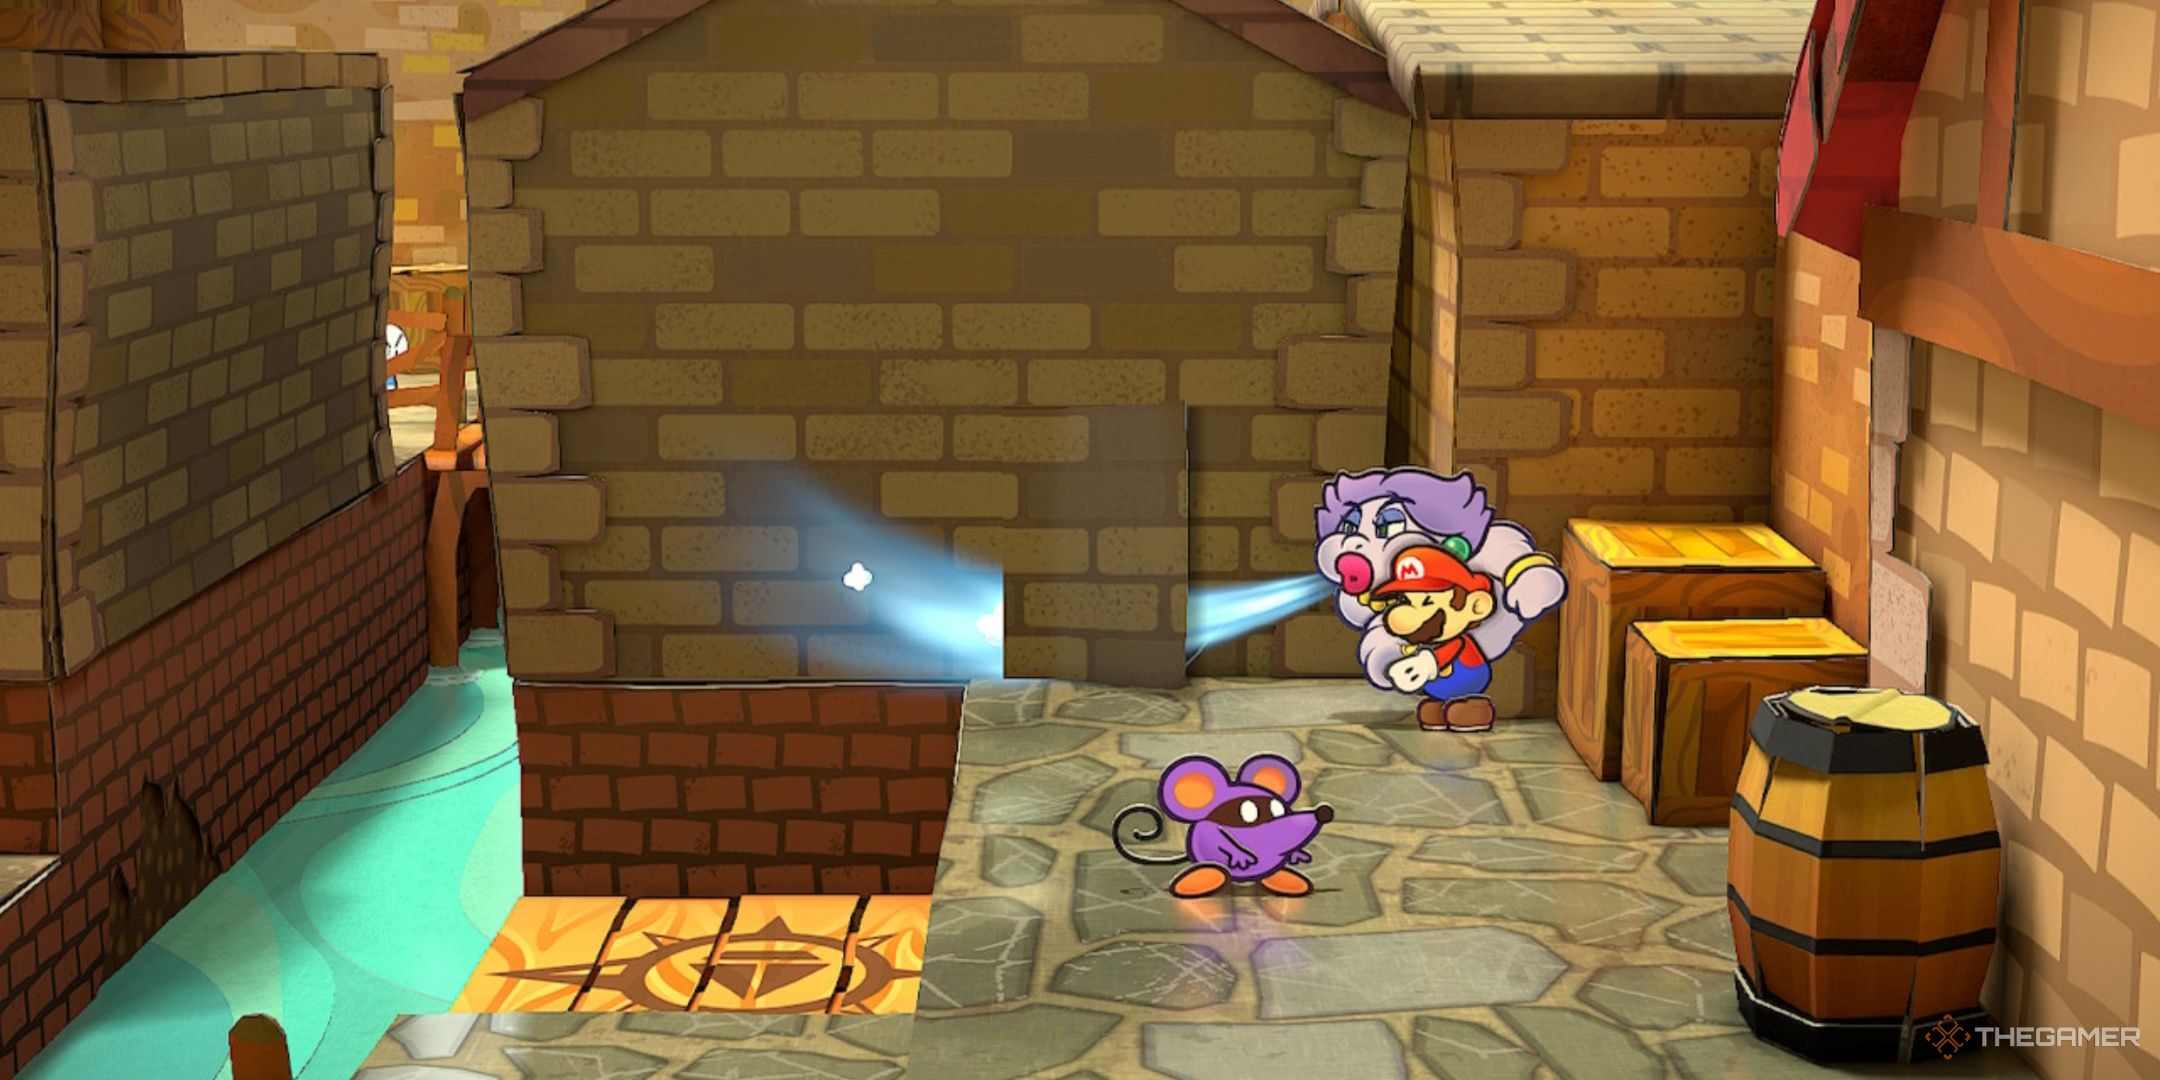 Blowing away a secret back door to the Trouble Center in Paper Mario The Thousand-Year Door